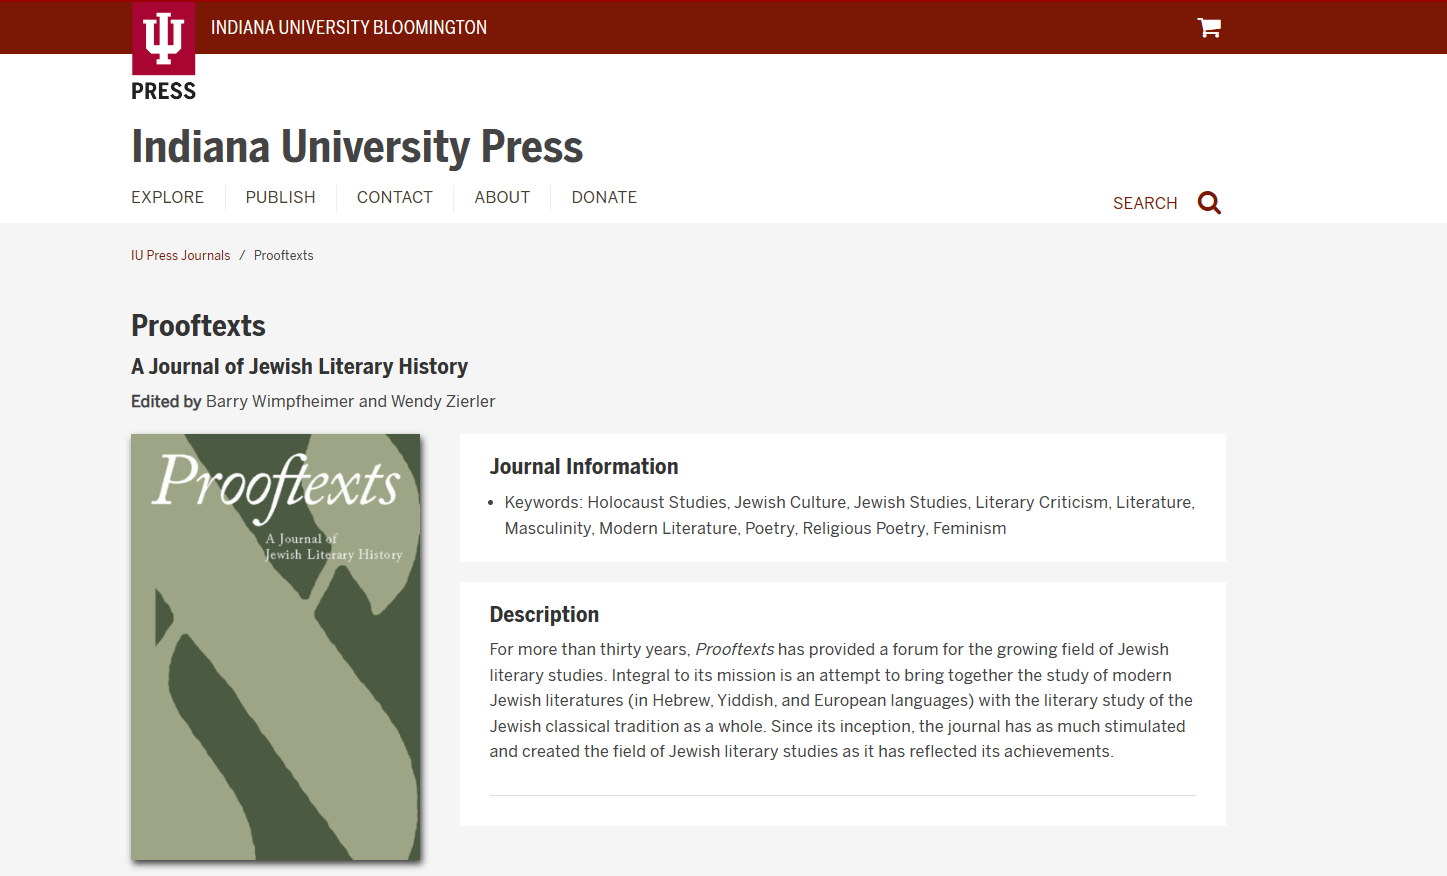 Prooftexts-A Journal of Jewish Literary History